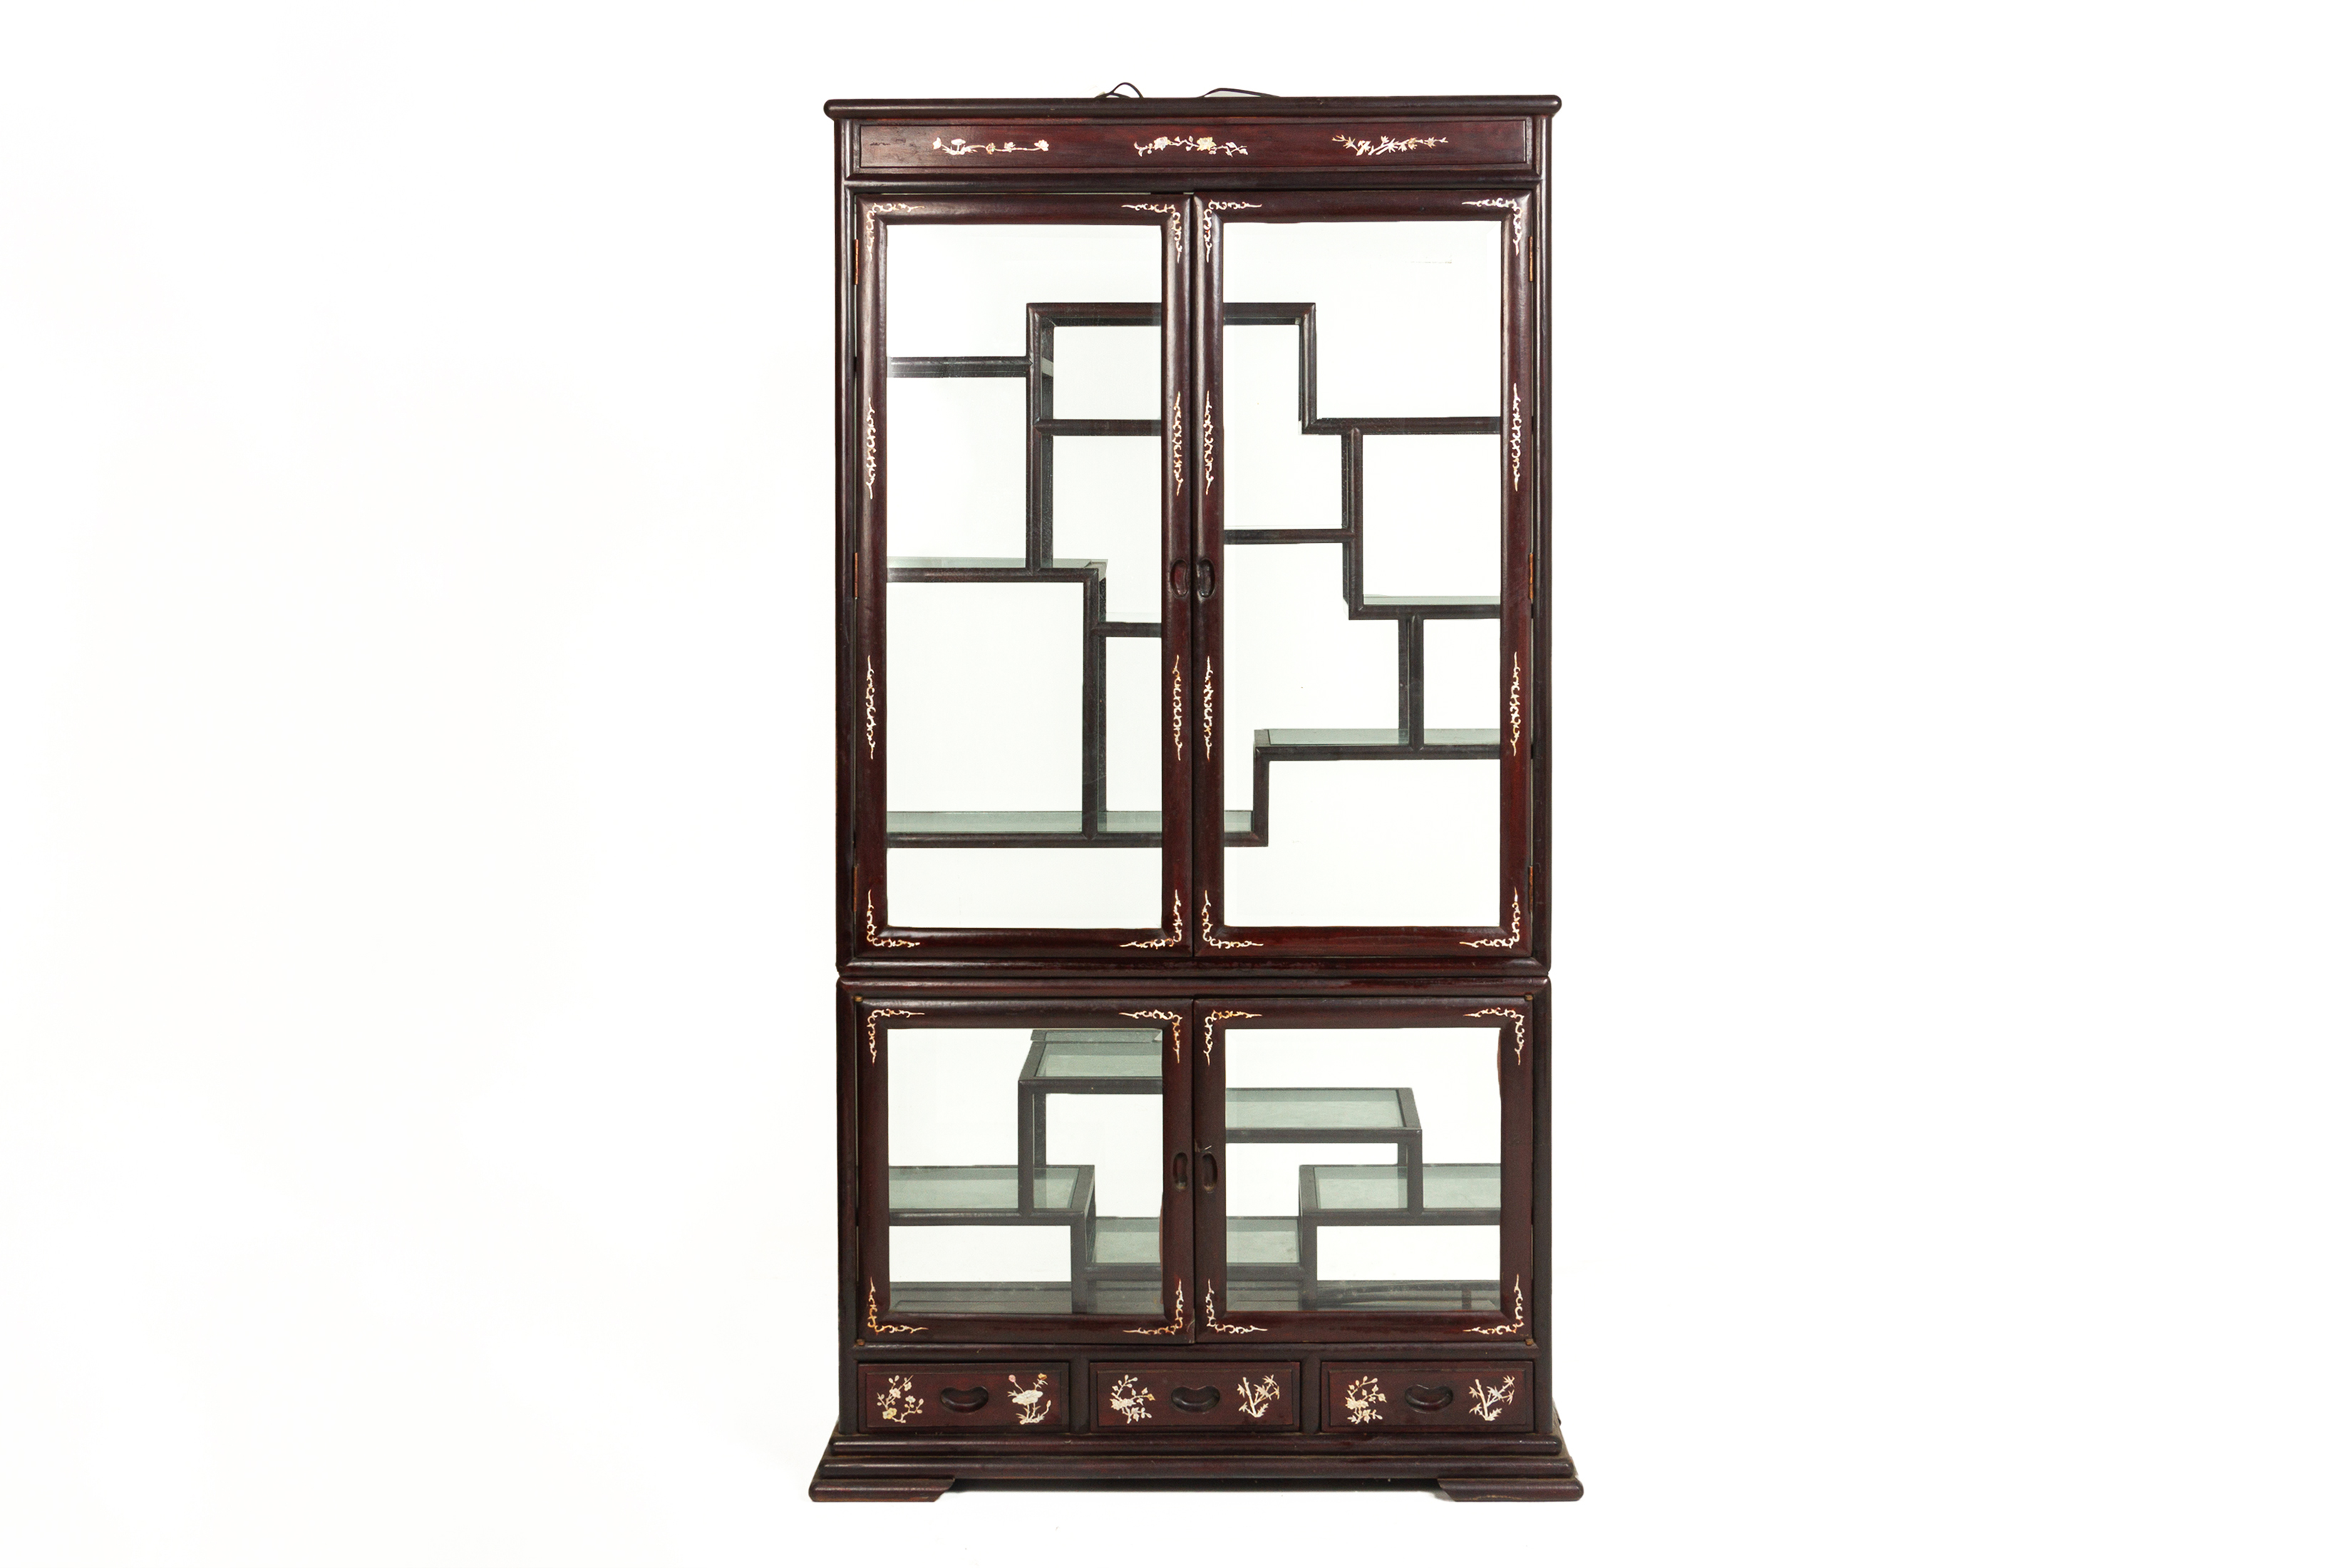 A MOTHER OF PEARL INLAID HARDWOOD GLAZED DISPLAY CABINET